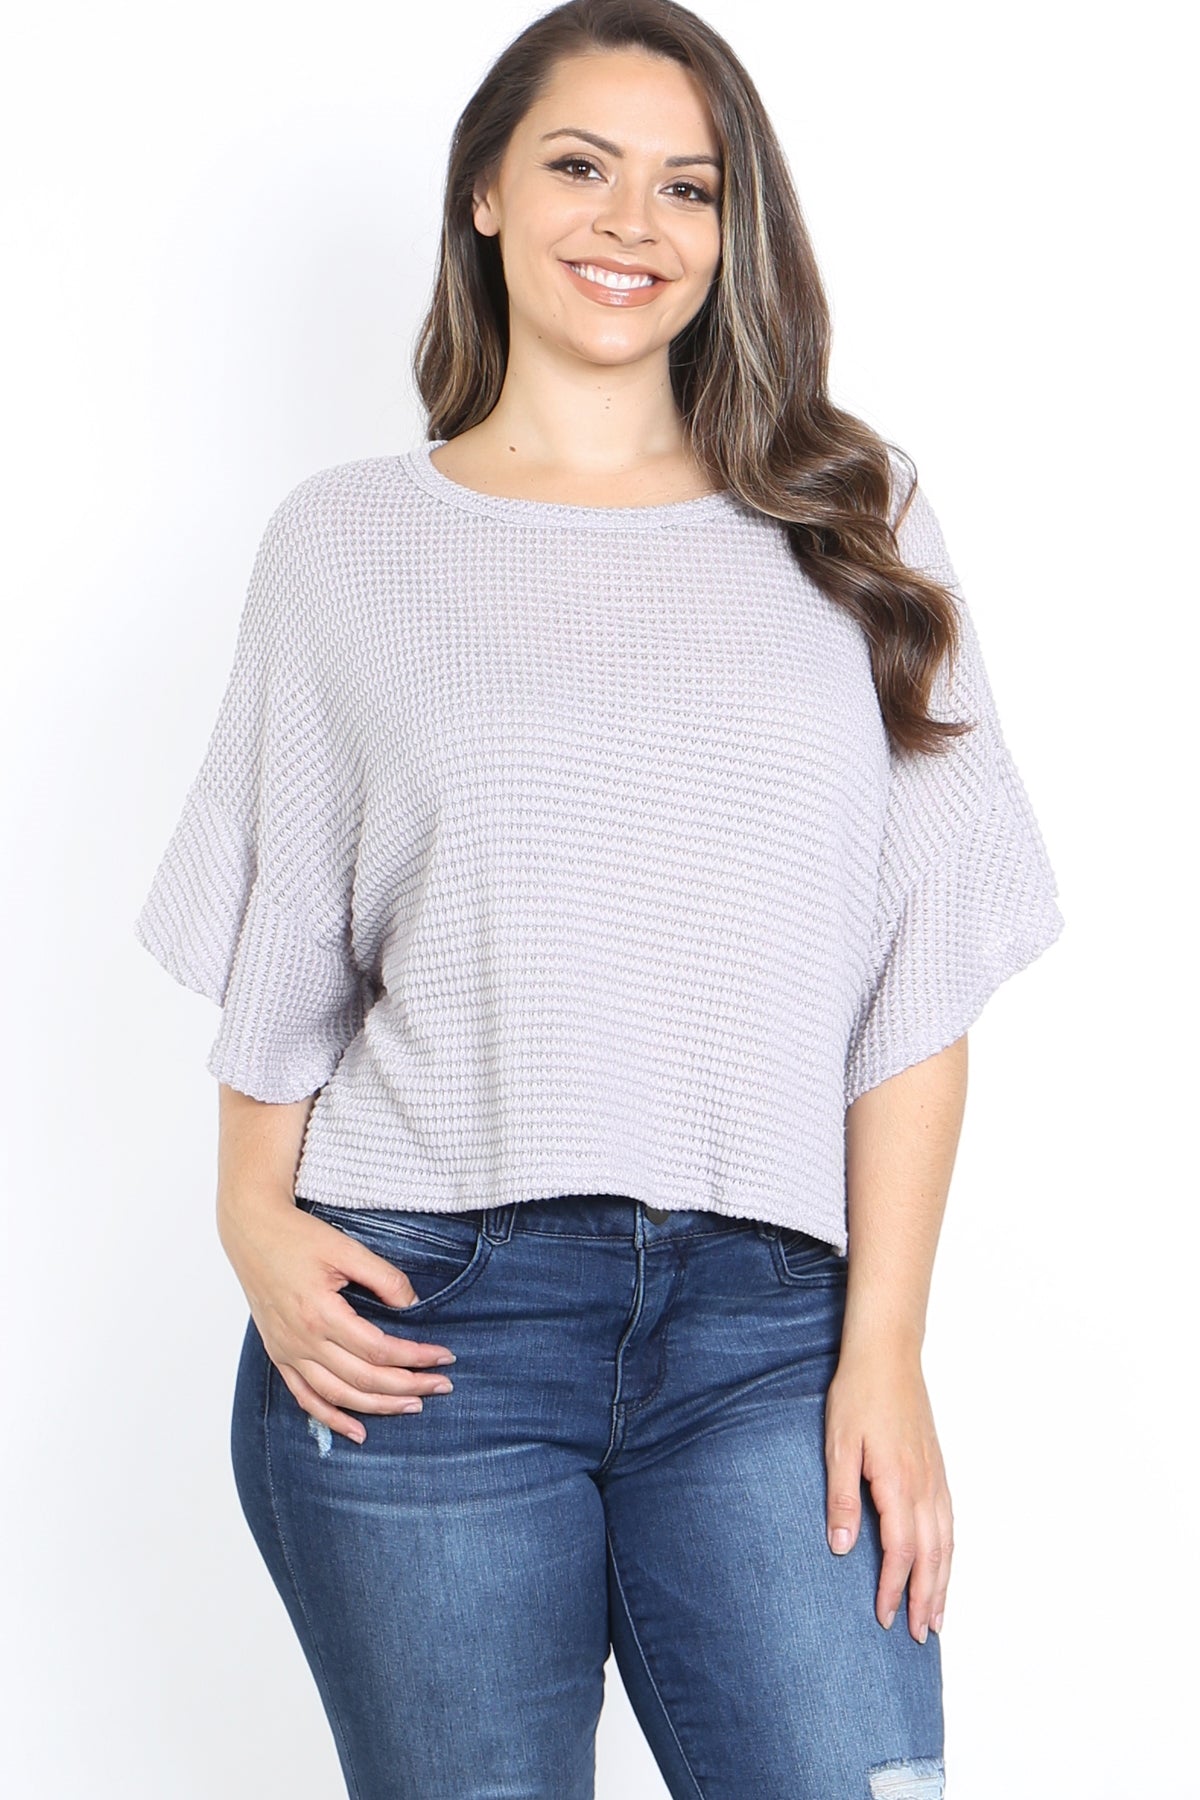 DUSTY LAVENDER BOAT NECKLINE RUFFLE SLEEVE WAFFLE FABRIC KNITTED BATWING PLUS SIZE TOP